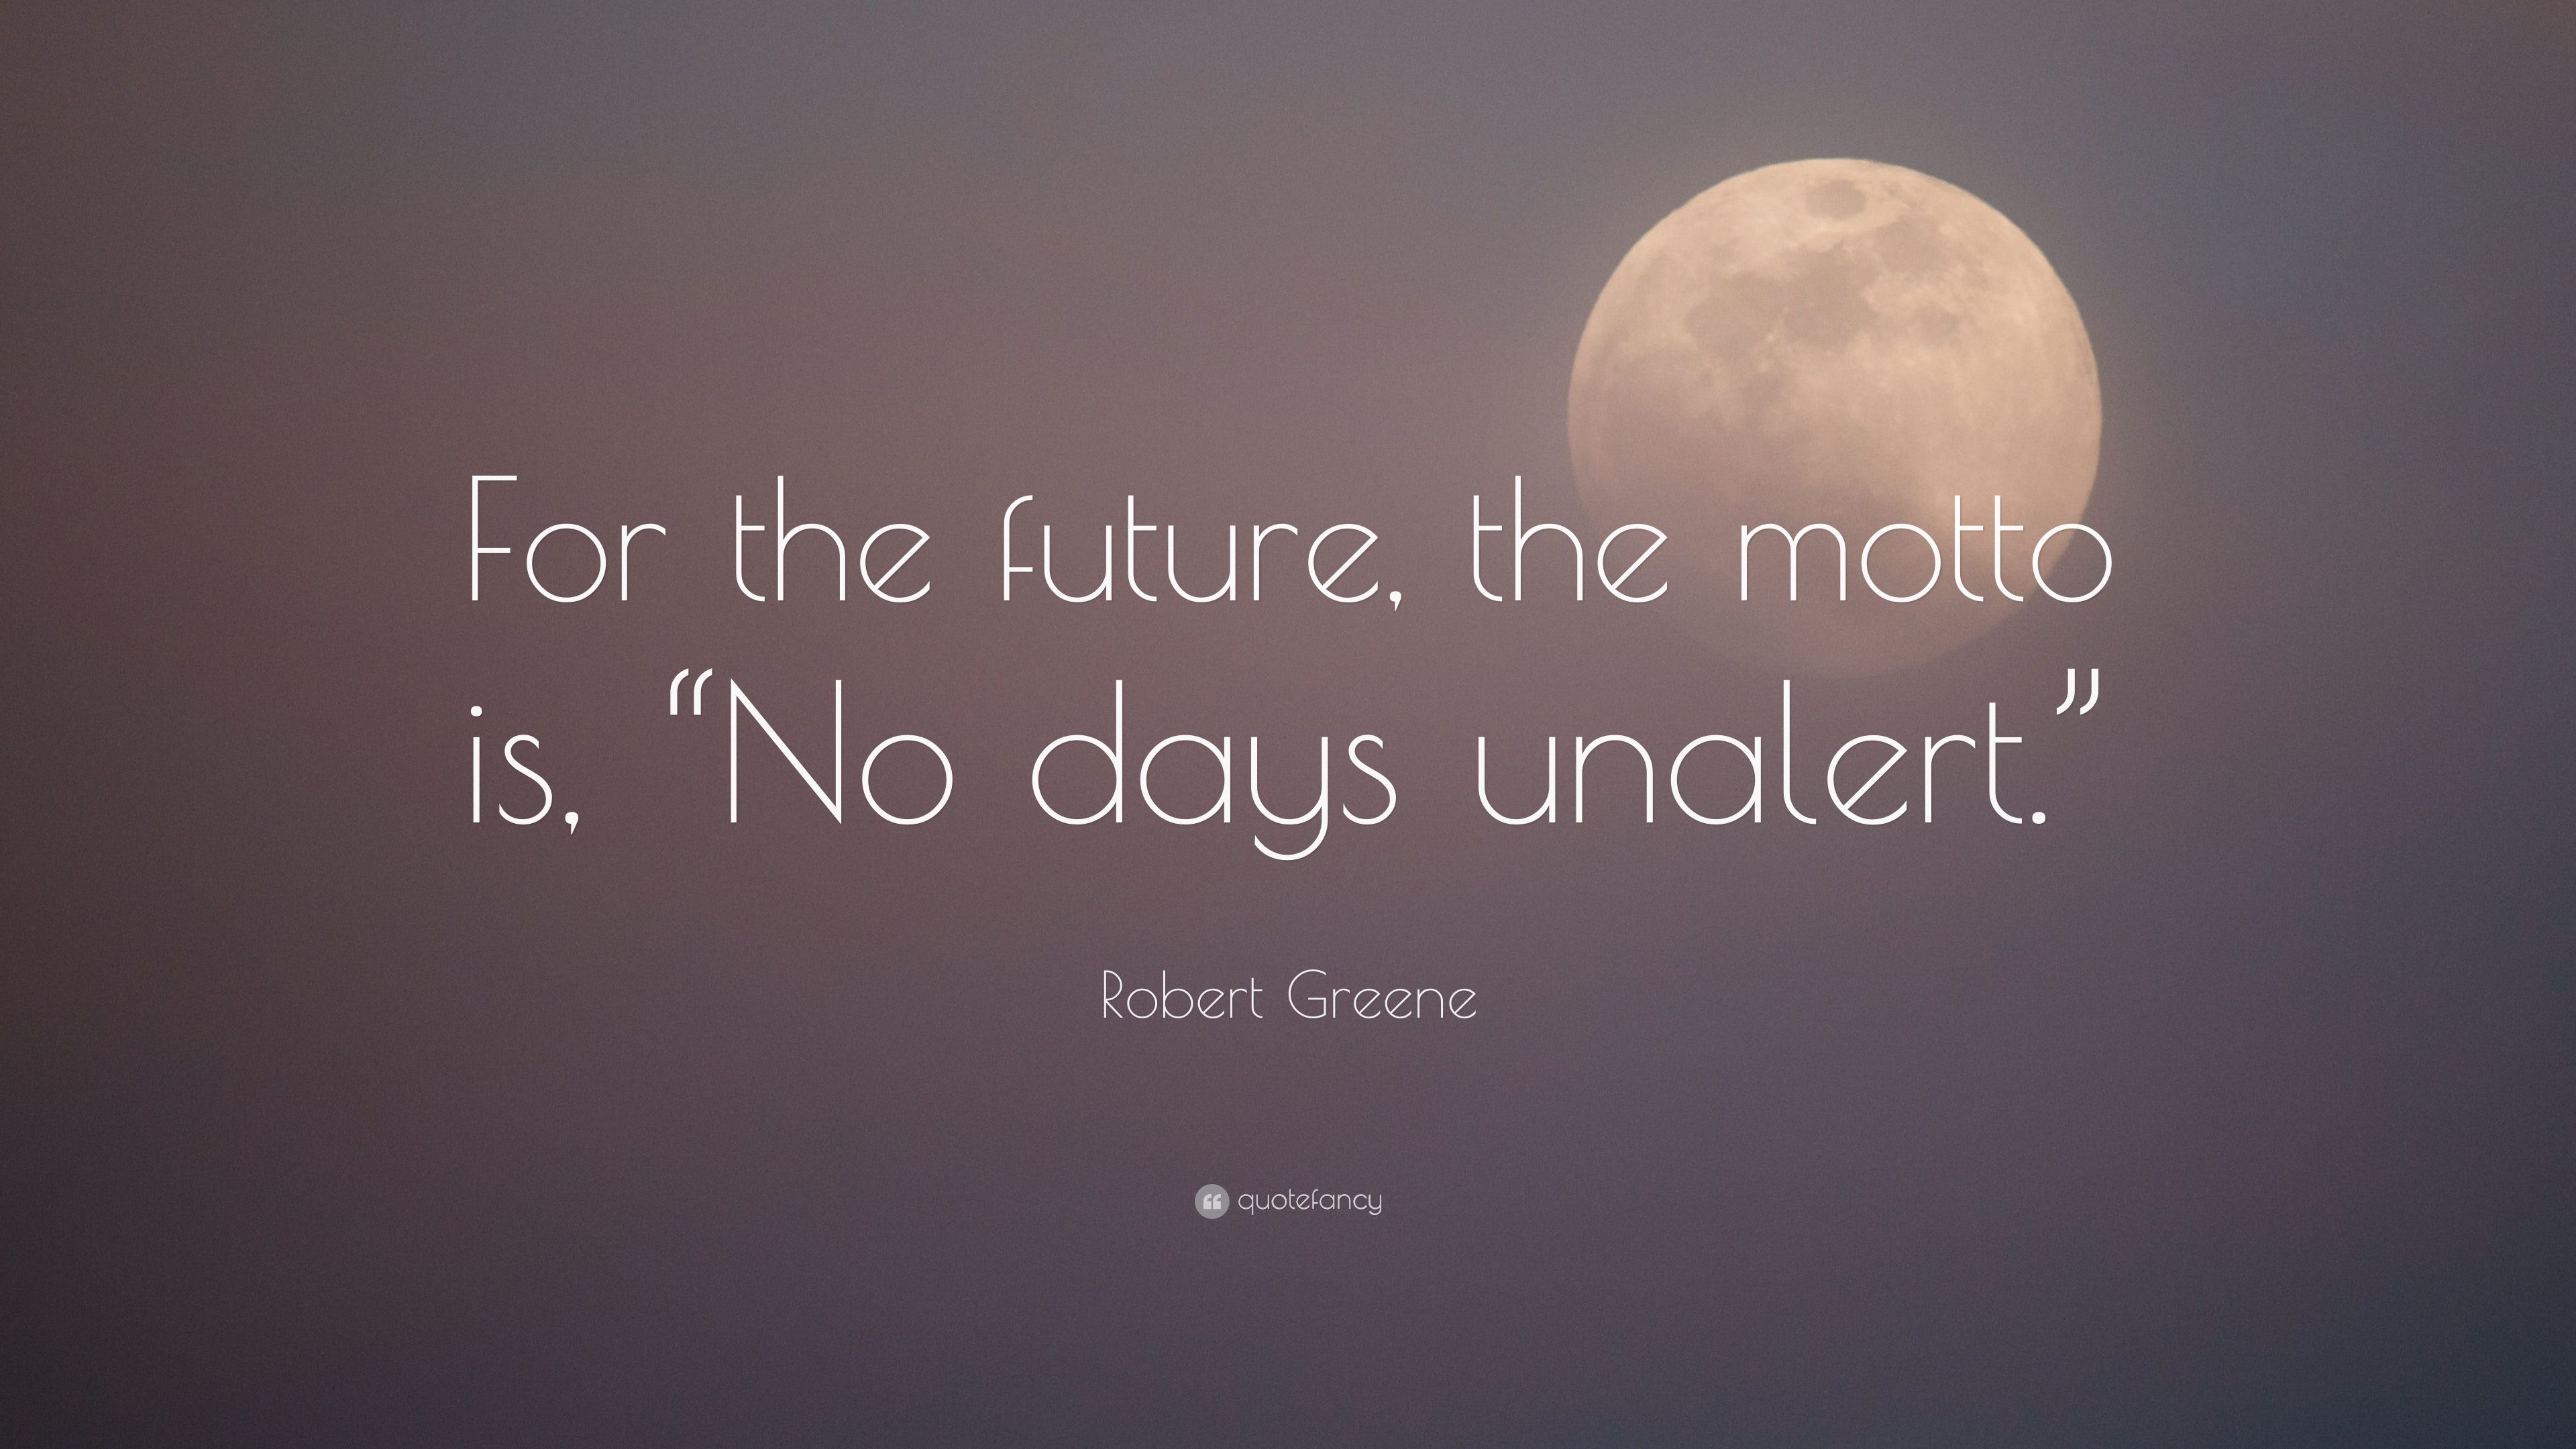 Robert Greene Quote: “For the future, the motto is, “No days